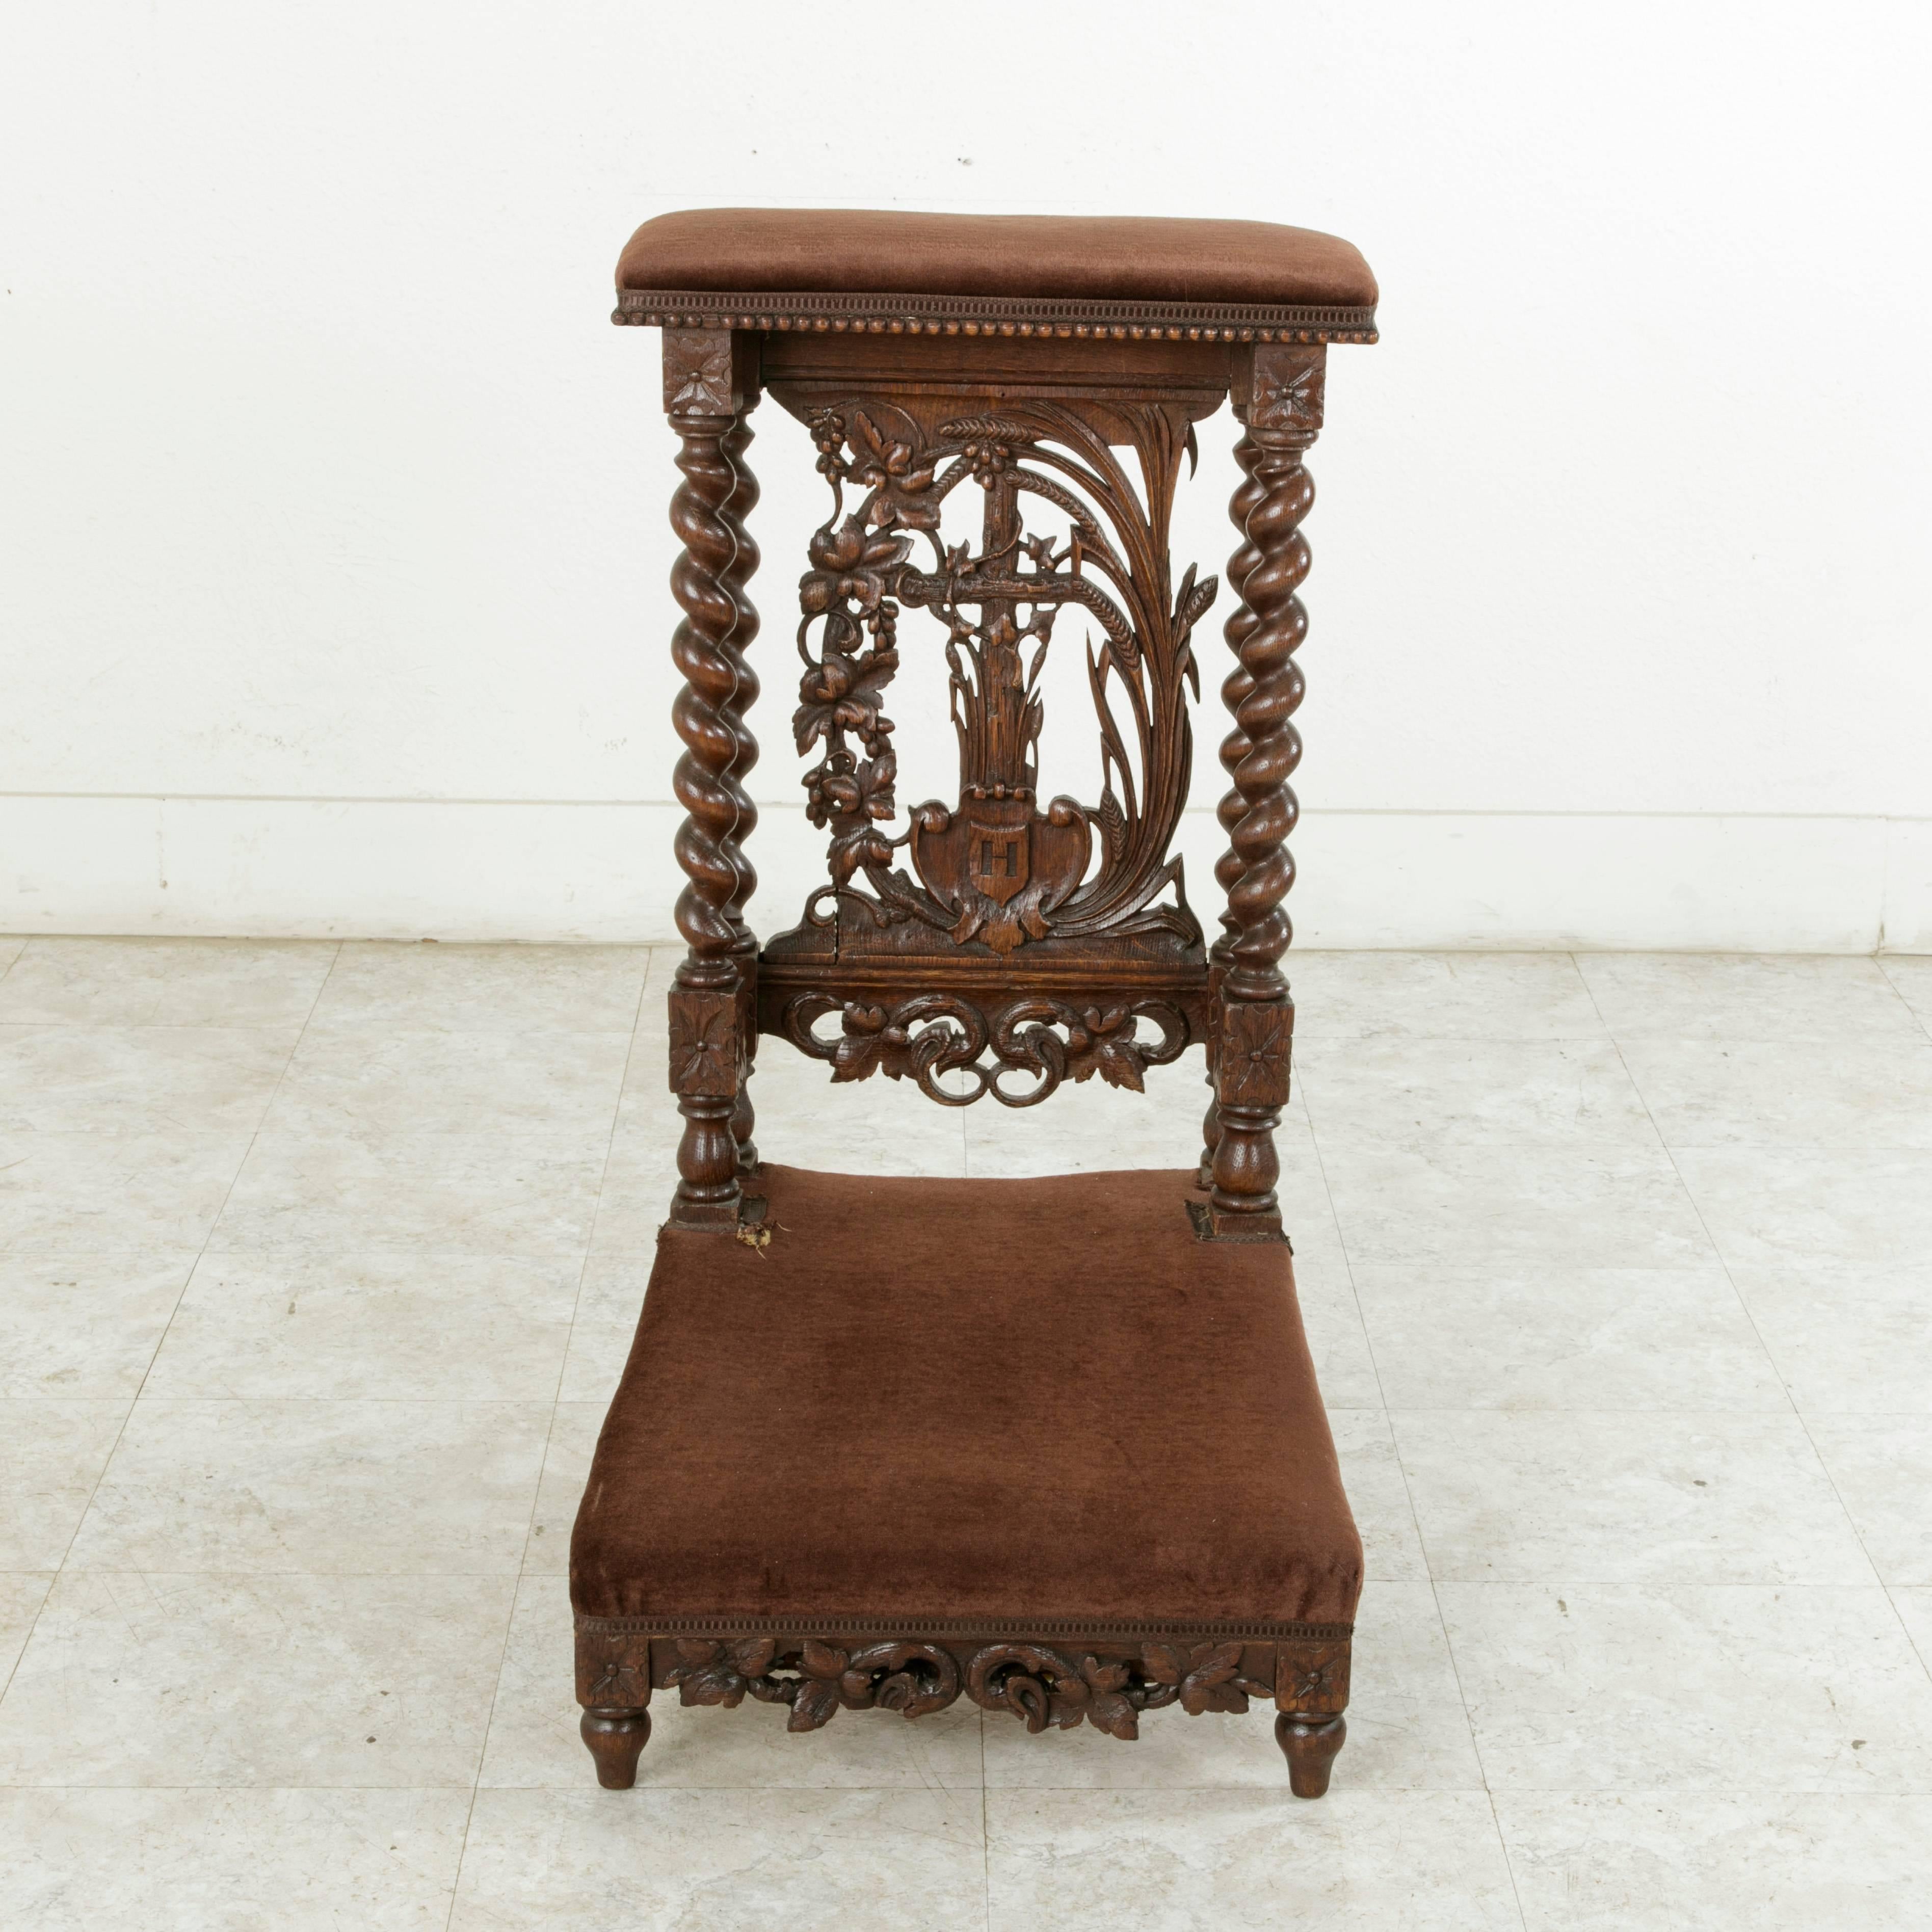 This French hand-carved oak prayer chair, or prie-dieu, in French, features double barley twist columns at the back that support the armrest. Rosettes adorn the die joints at the top and bottom of the columns. The back displays an intricately